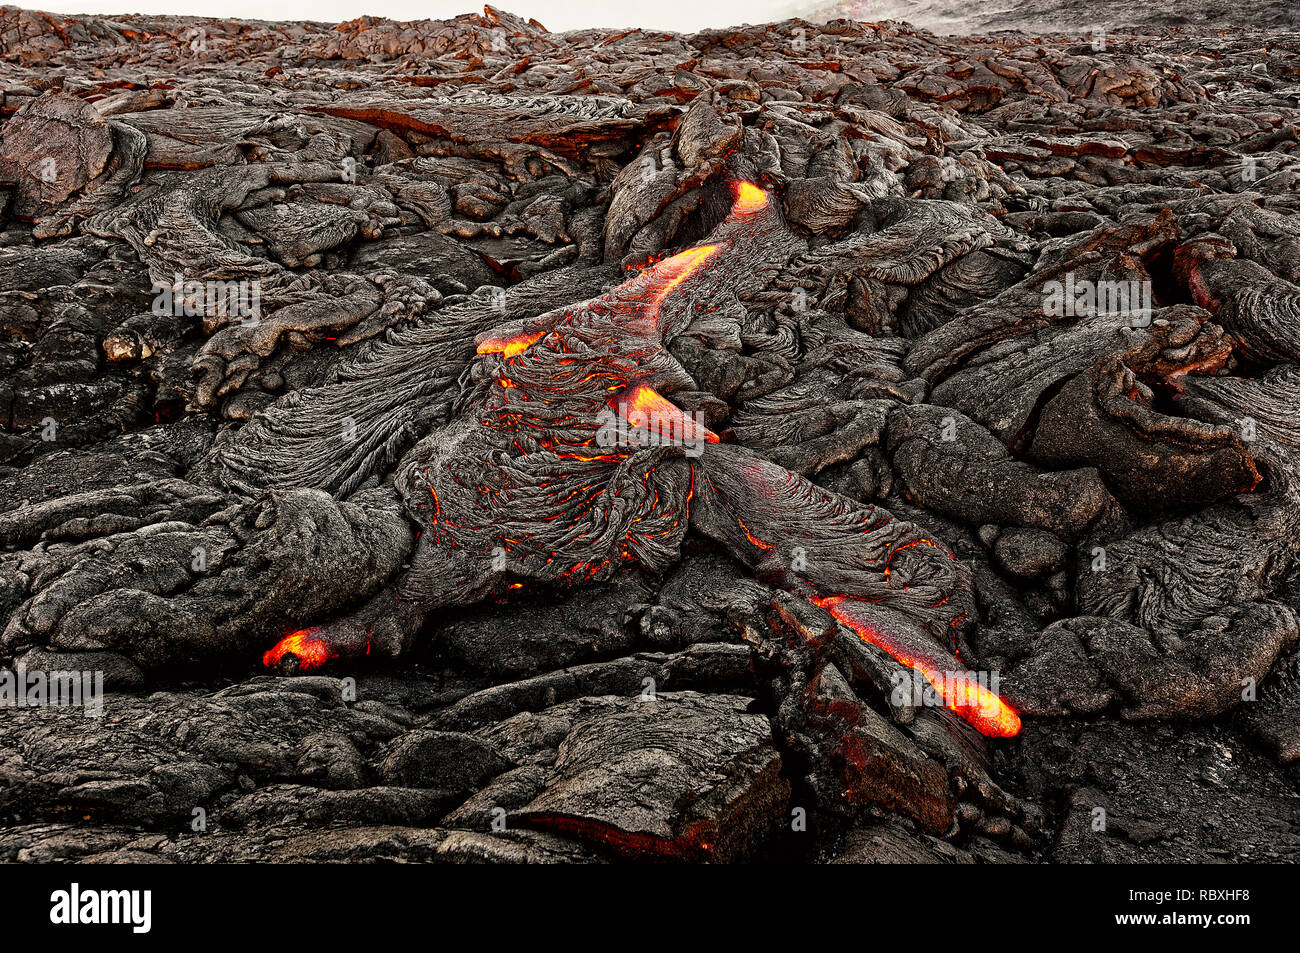 A lava flow emerges from an earth column and flows in a black volcanic landscape, in the sky shows the first daylight - Location: Hawaii, Big Island,  Stock Photo